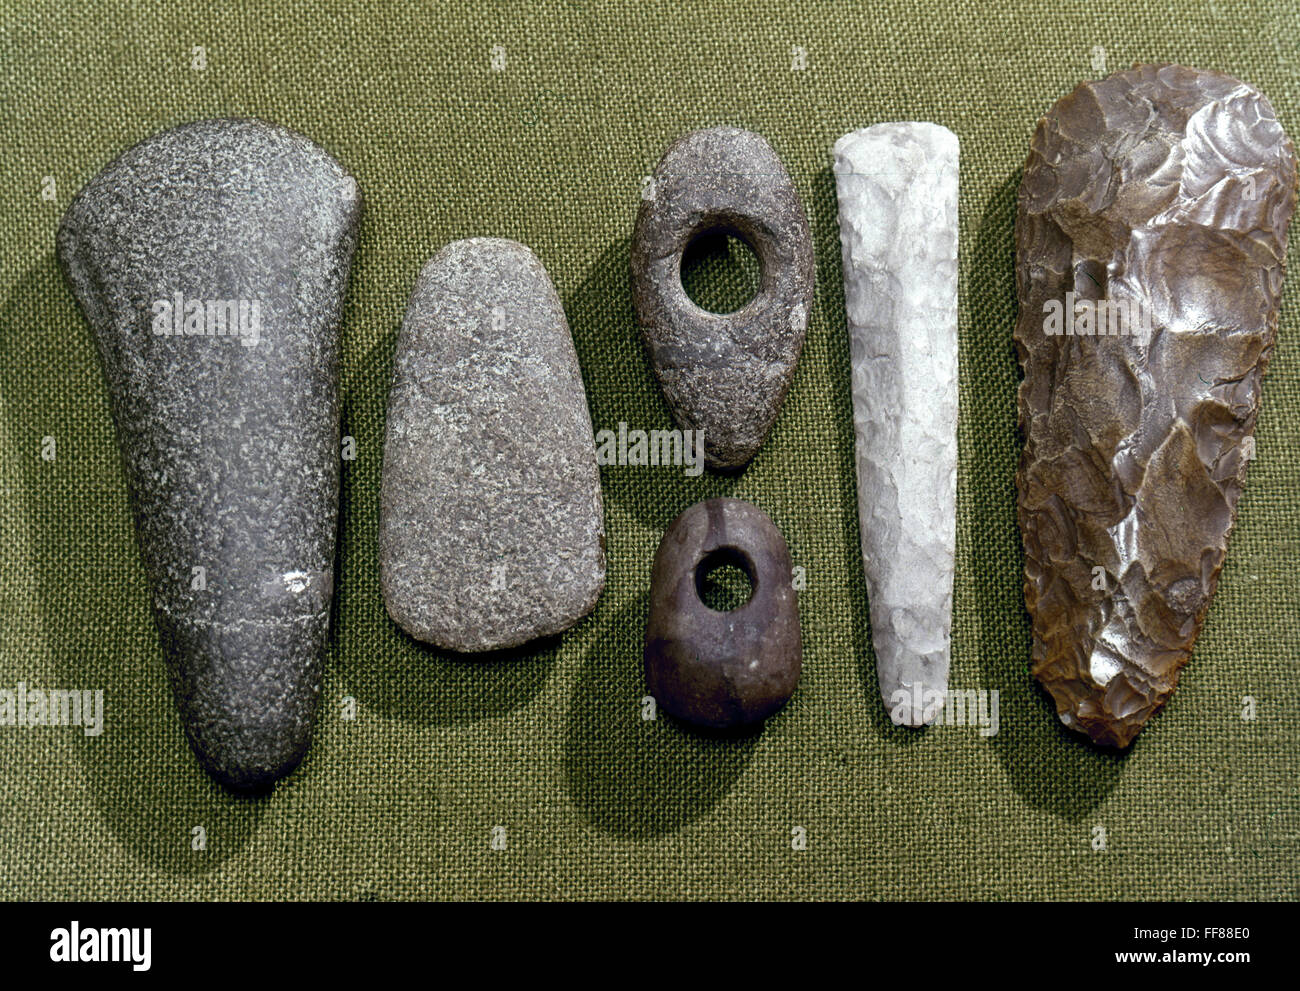 NEOLITHIC TOOLS. /nNeolithic stone and flint tools found in Essex, England, c2700-1800 B.C. Stock Photo